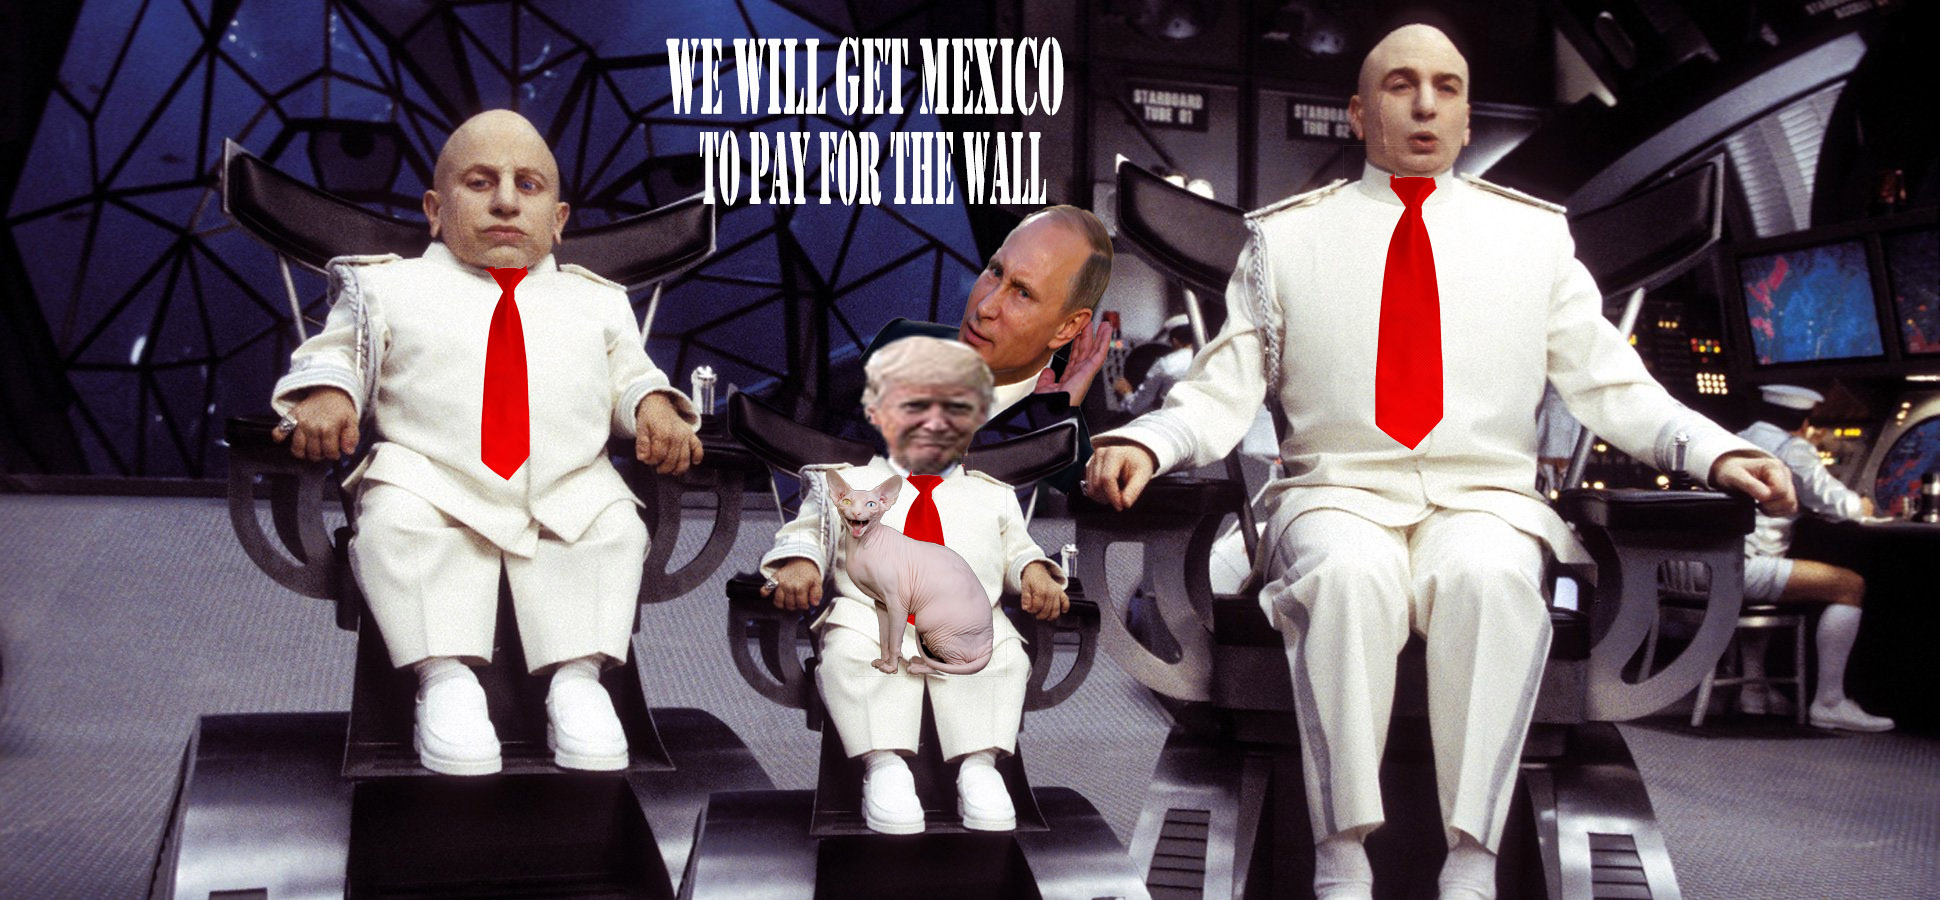 Dr Evil, MINI-Me And Tiny Trump come up with plan.